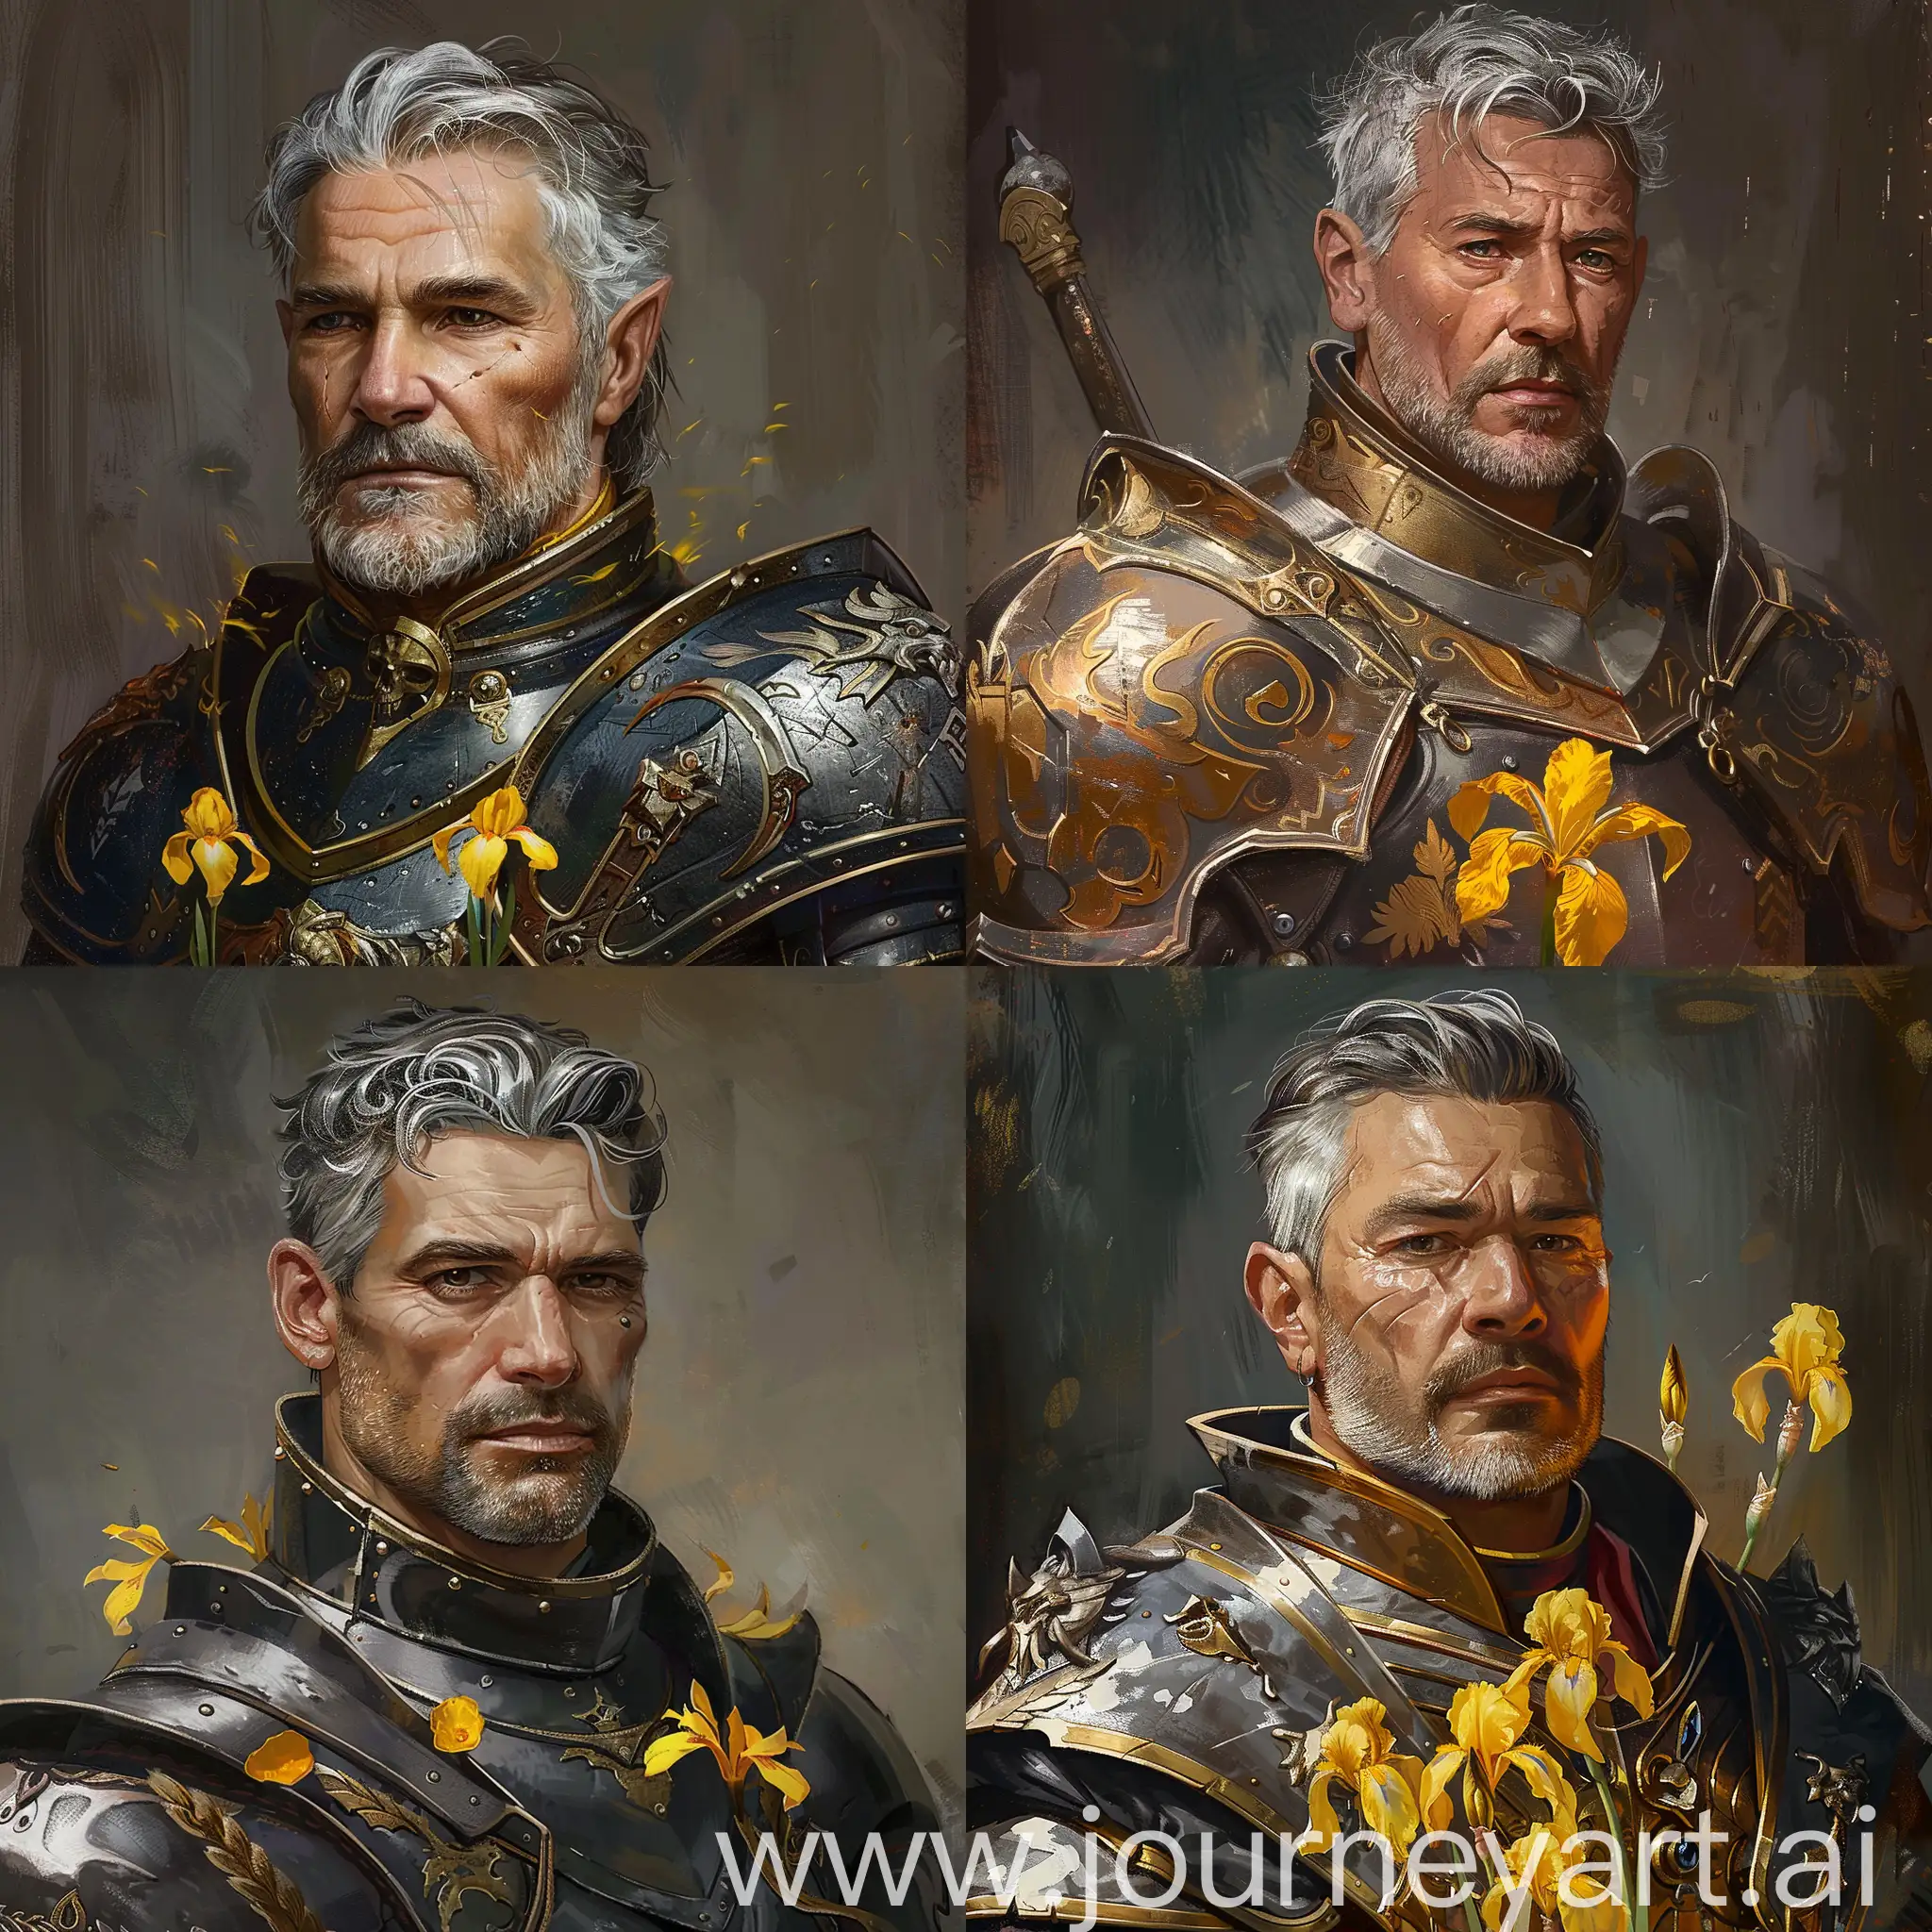 Medieval-Knight-with-Gray-Hair-and-Yellow-Eyes-Portrait-Dungeons-Dragons-Style